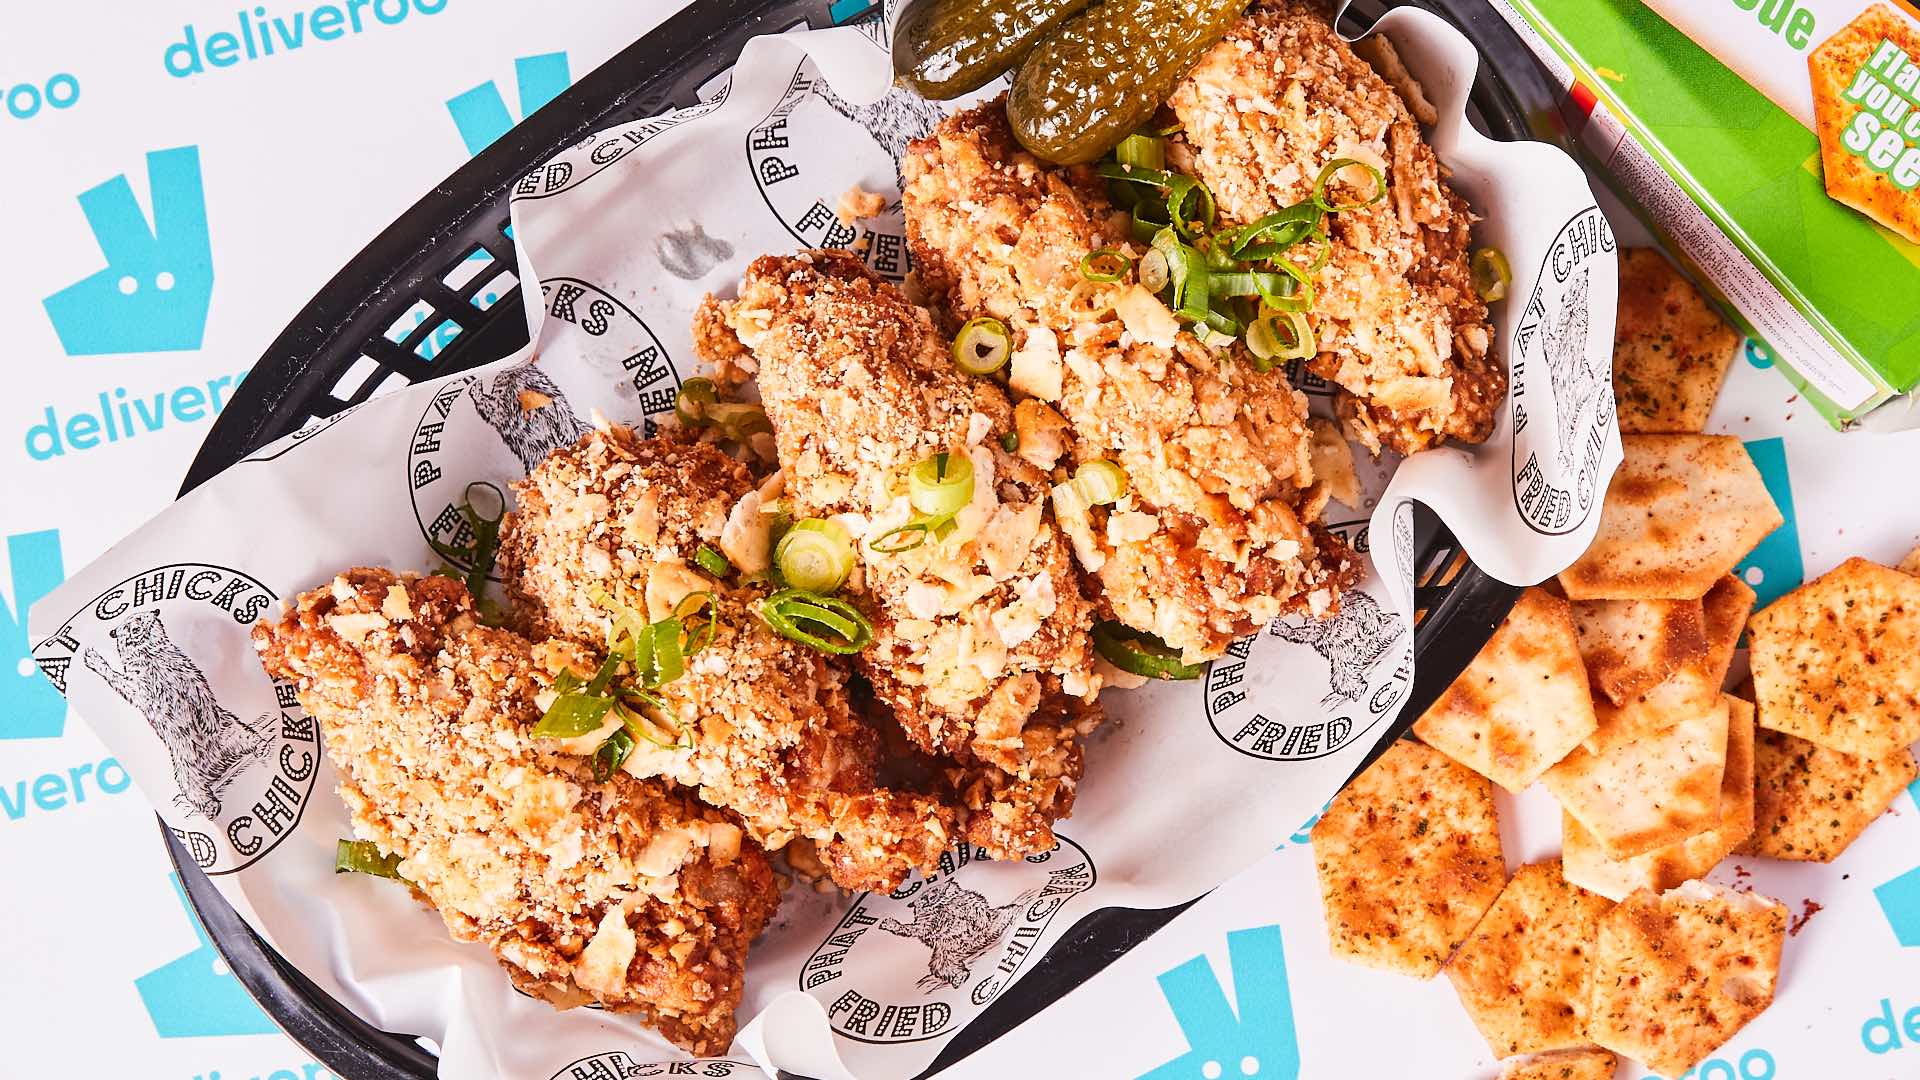 This Fried Chicken Coated in Barbecue Shapes Is the Ultimate After-School Snack